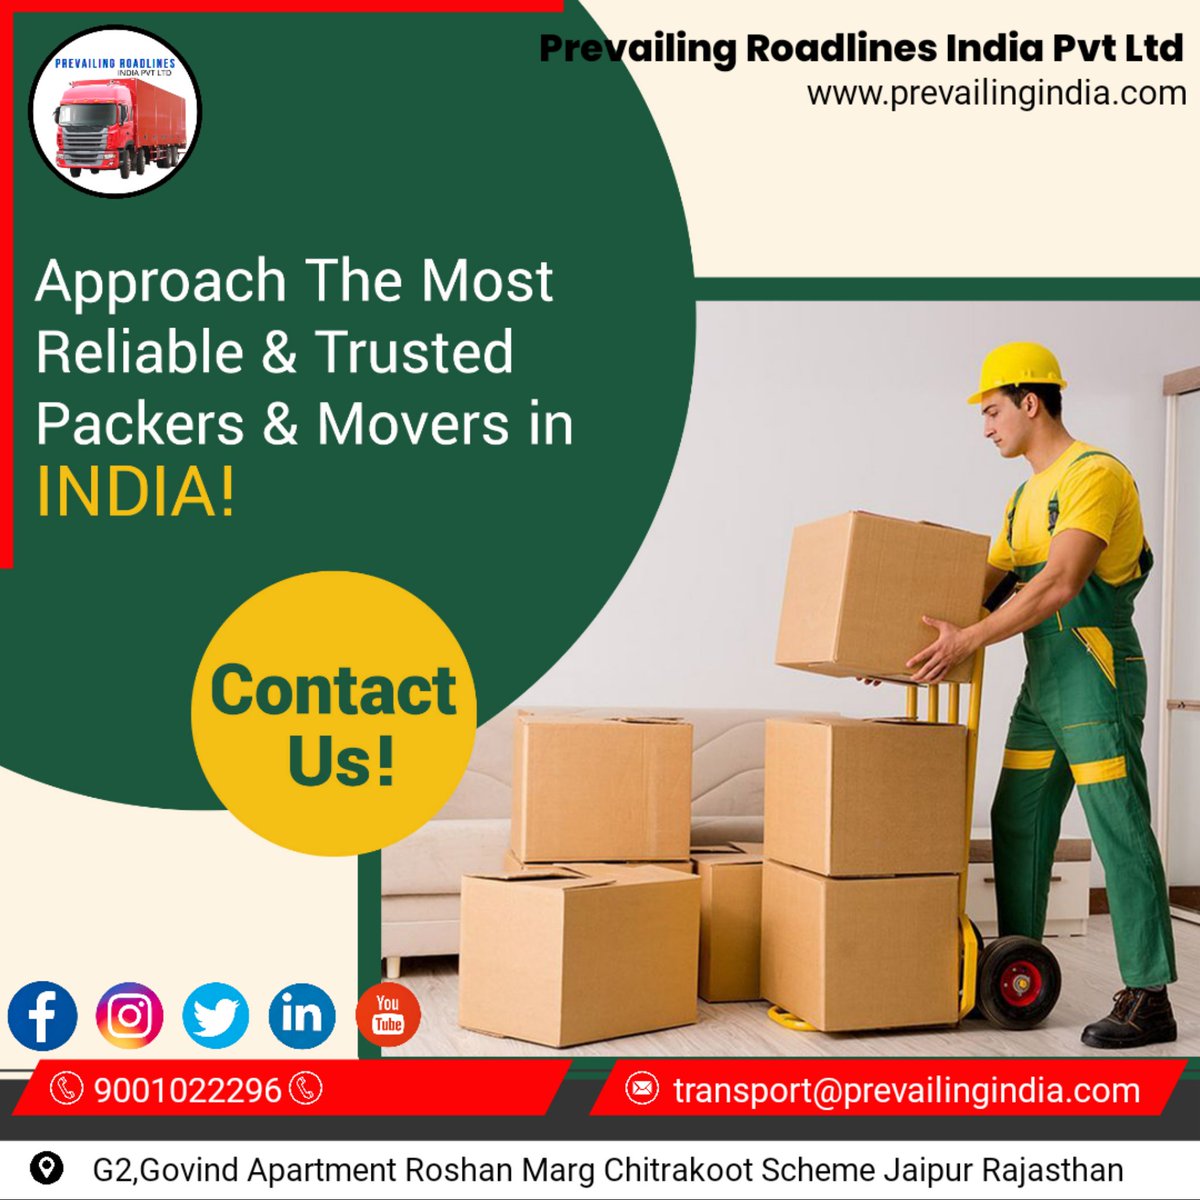 Approach The Most Reliable & Trusted Packers & Movers In India

Kindly approch for Your Requirment.

#packersandmovers #packersandmoversindia #moversandpackers #MoversExpress #shiftingservices #shiftingcompany #doorstepdelivery #packaging